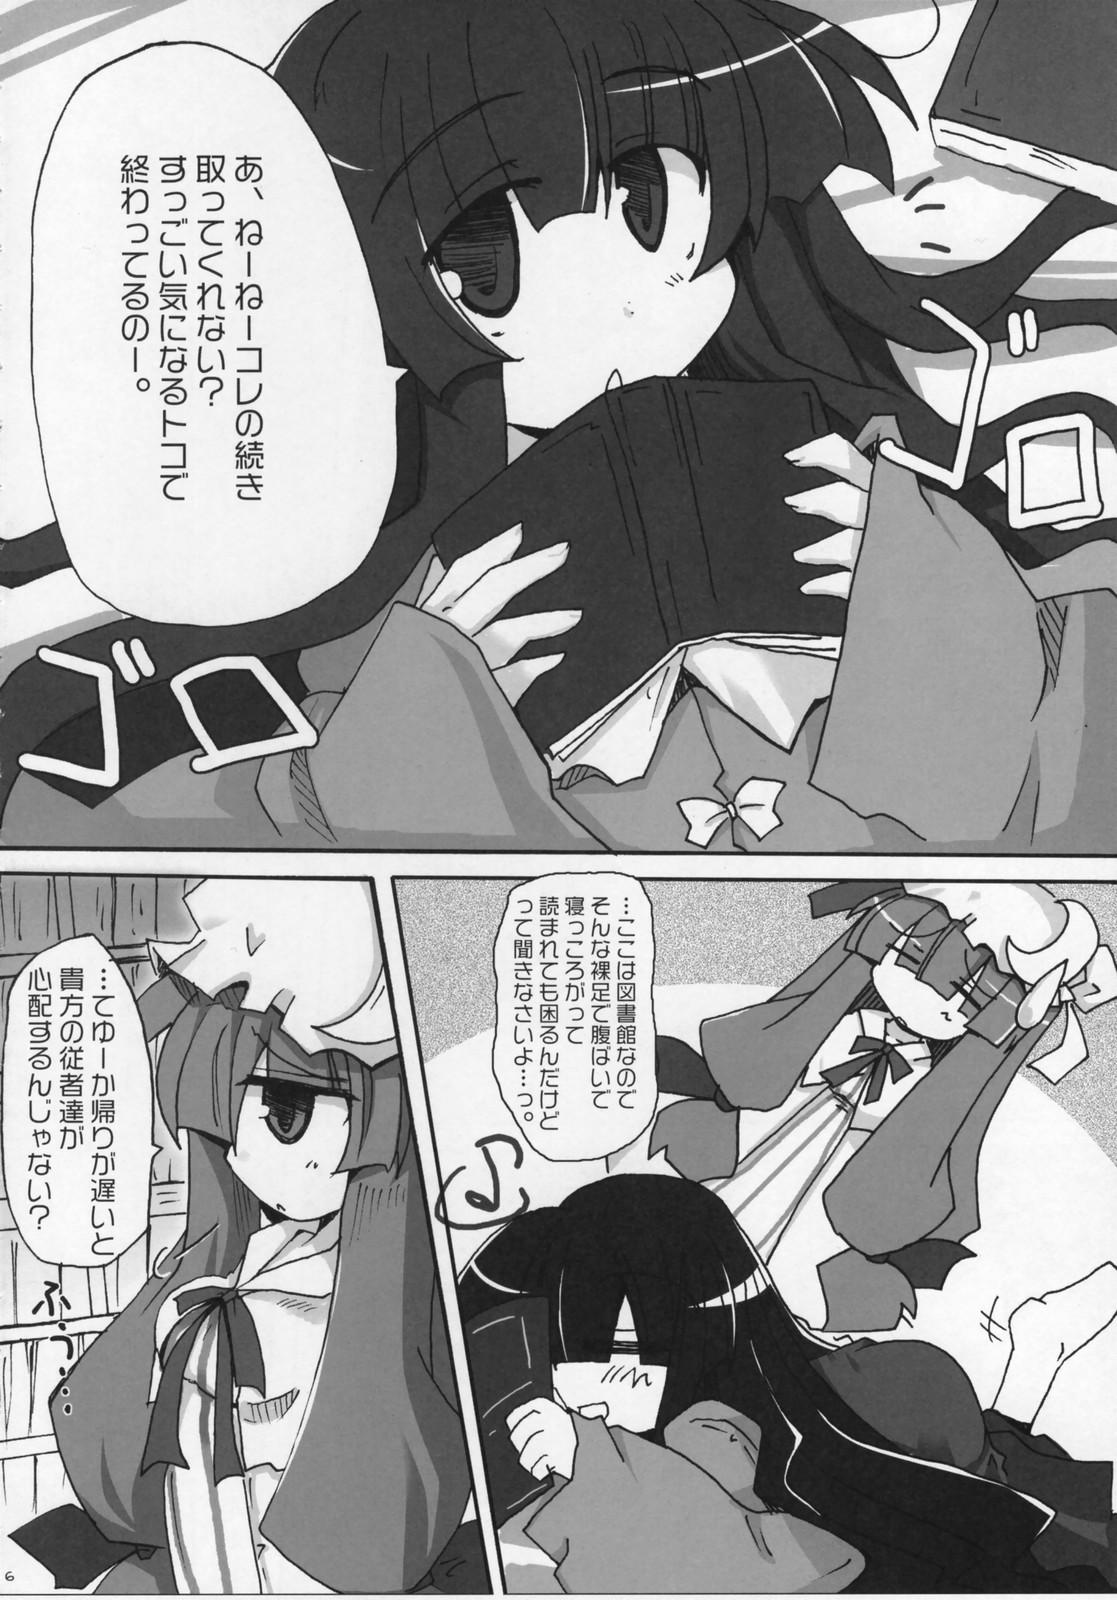 First Time [Oppai-Bloomer!] Love-chuchu-GOGO-2! (Touhou Project) - Touhou project Ejaculation - Page 5